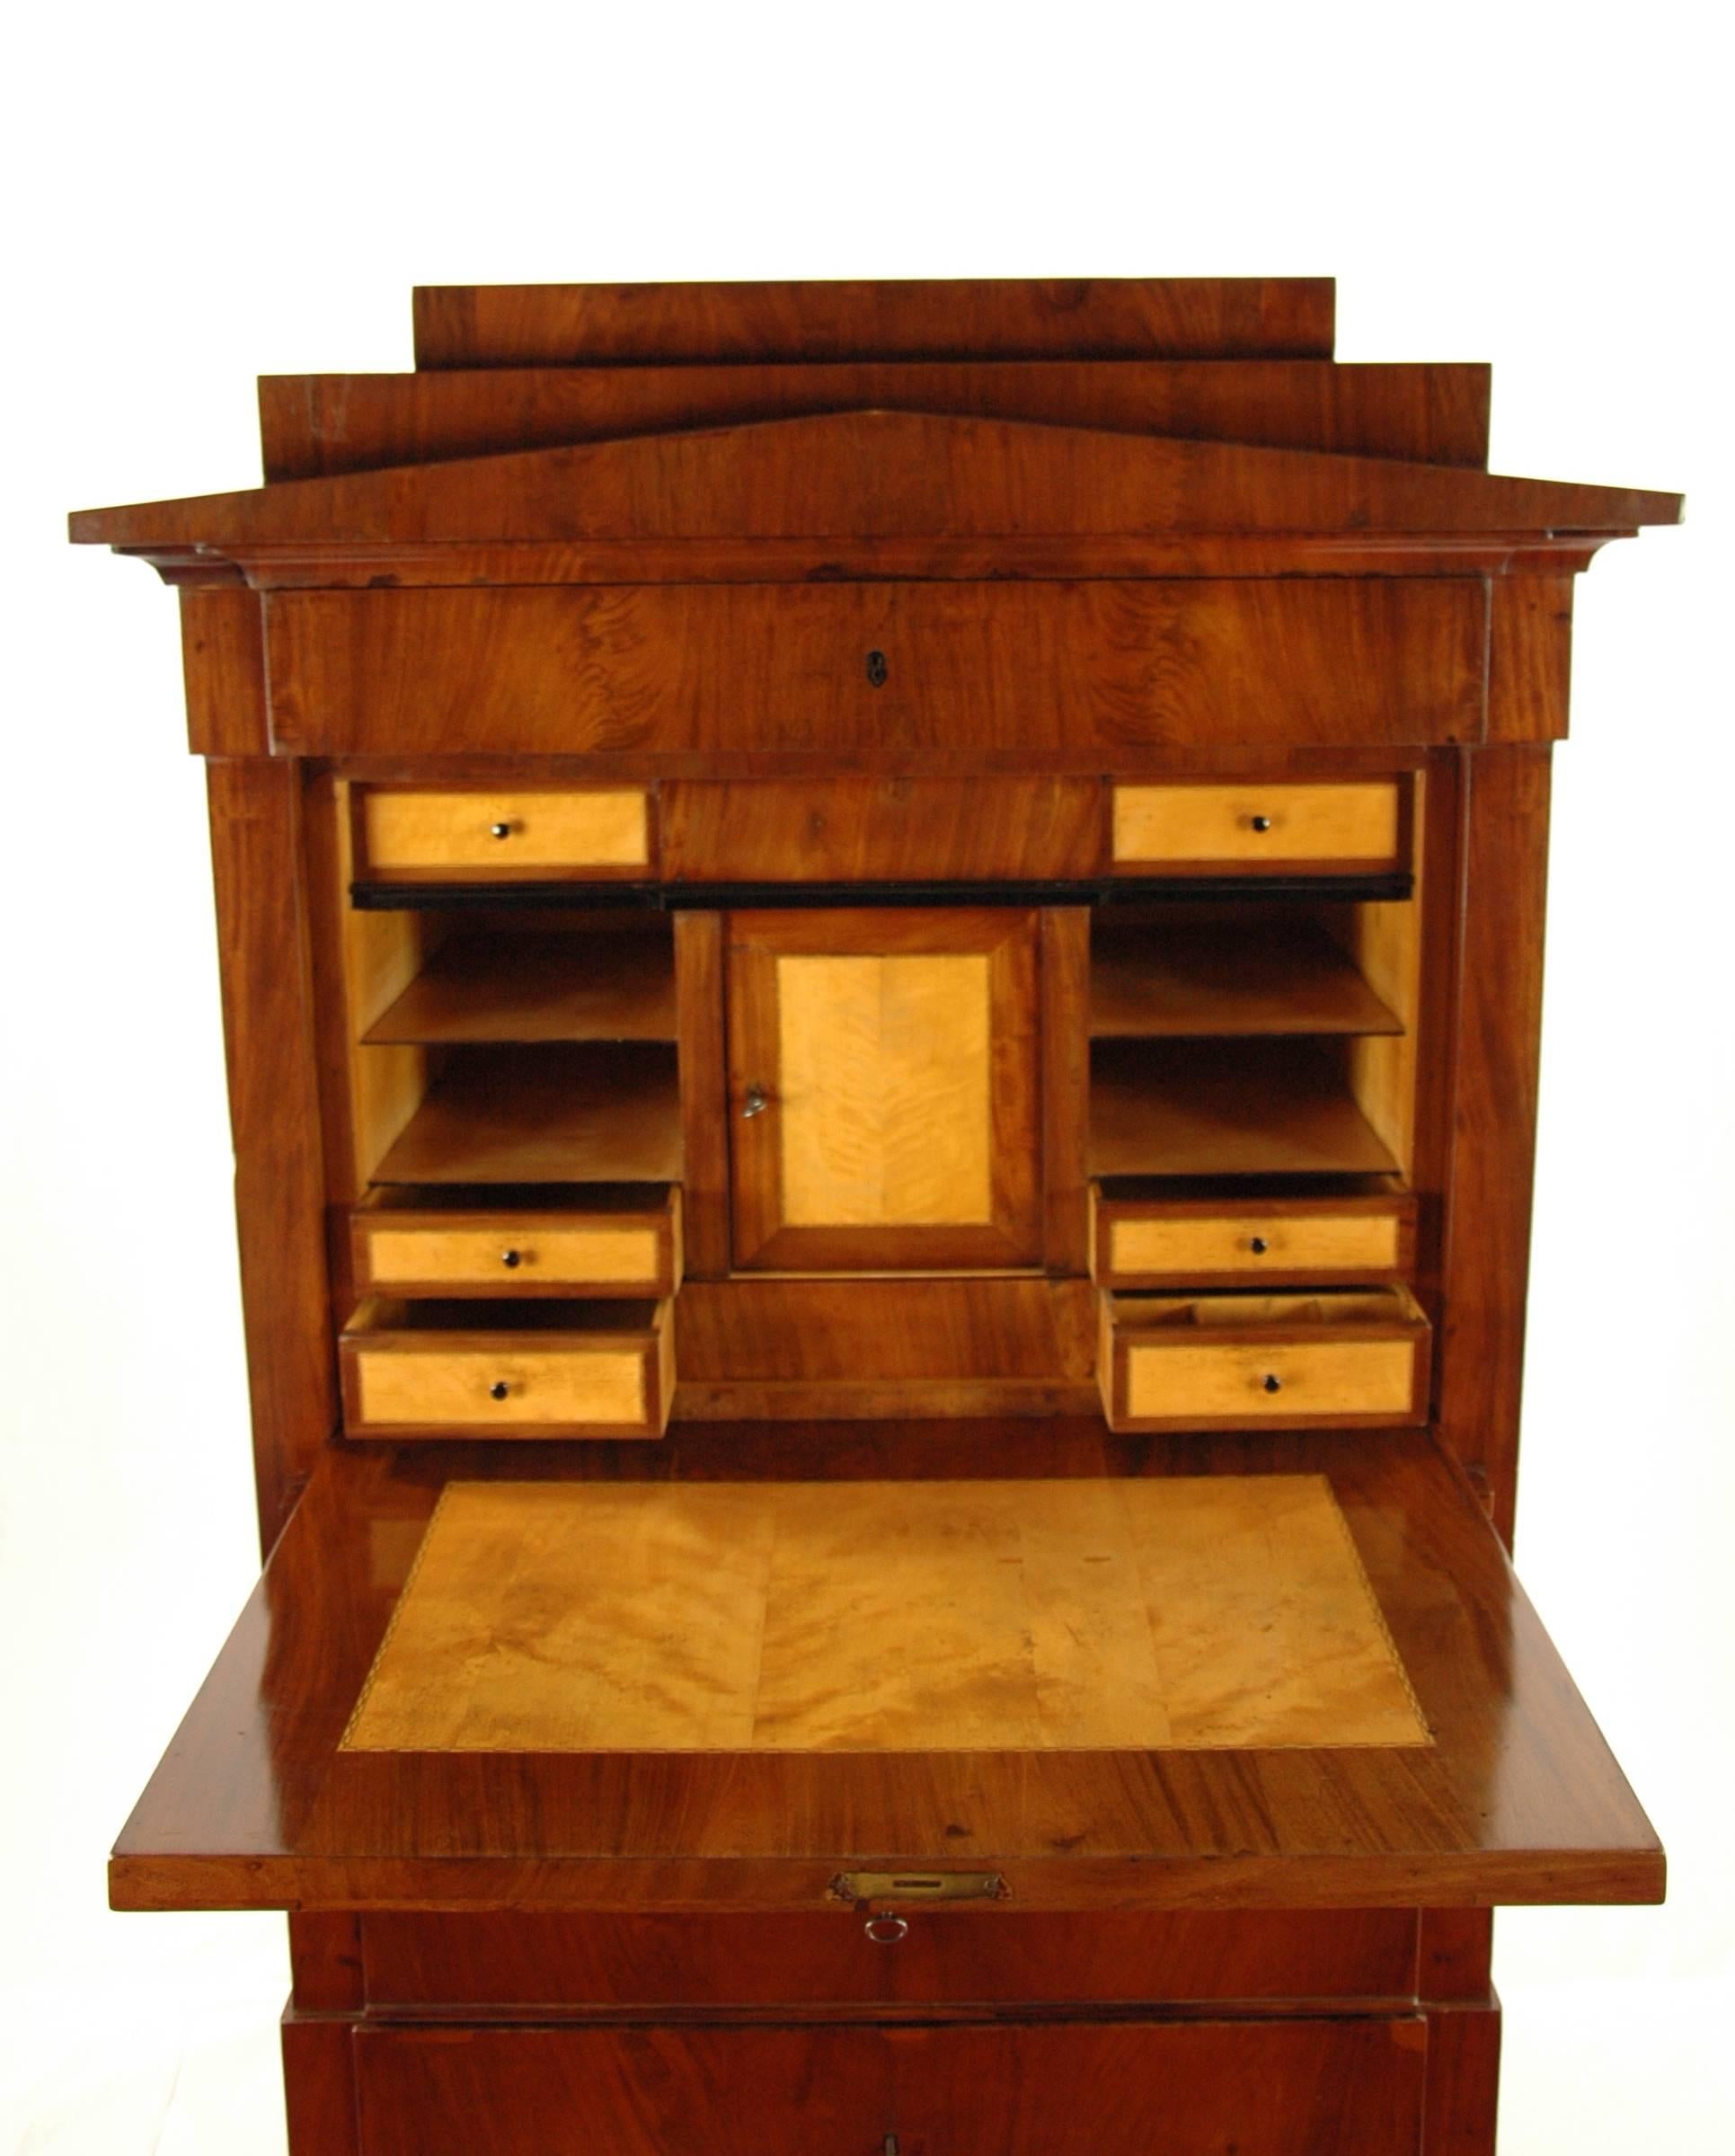 Secretary, circa 1830, North Germany
Nice reflected mahogany veneered
Architectural inner life with birchwood veneered
Strict straight concept
Restored residential-ready state
French shellac hand polish
Measures: Height 164 cm, width 107 cm,